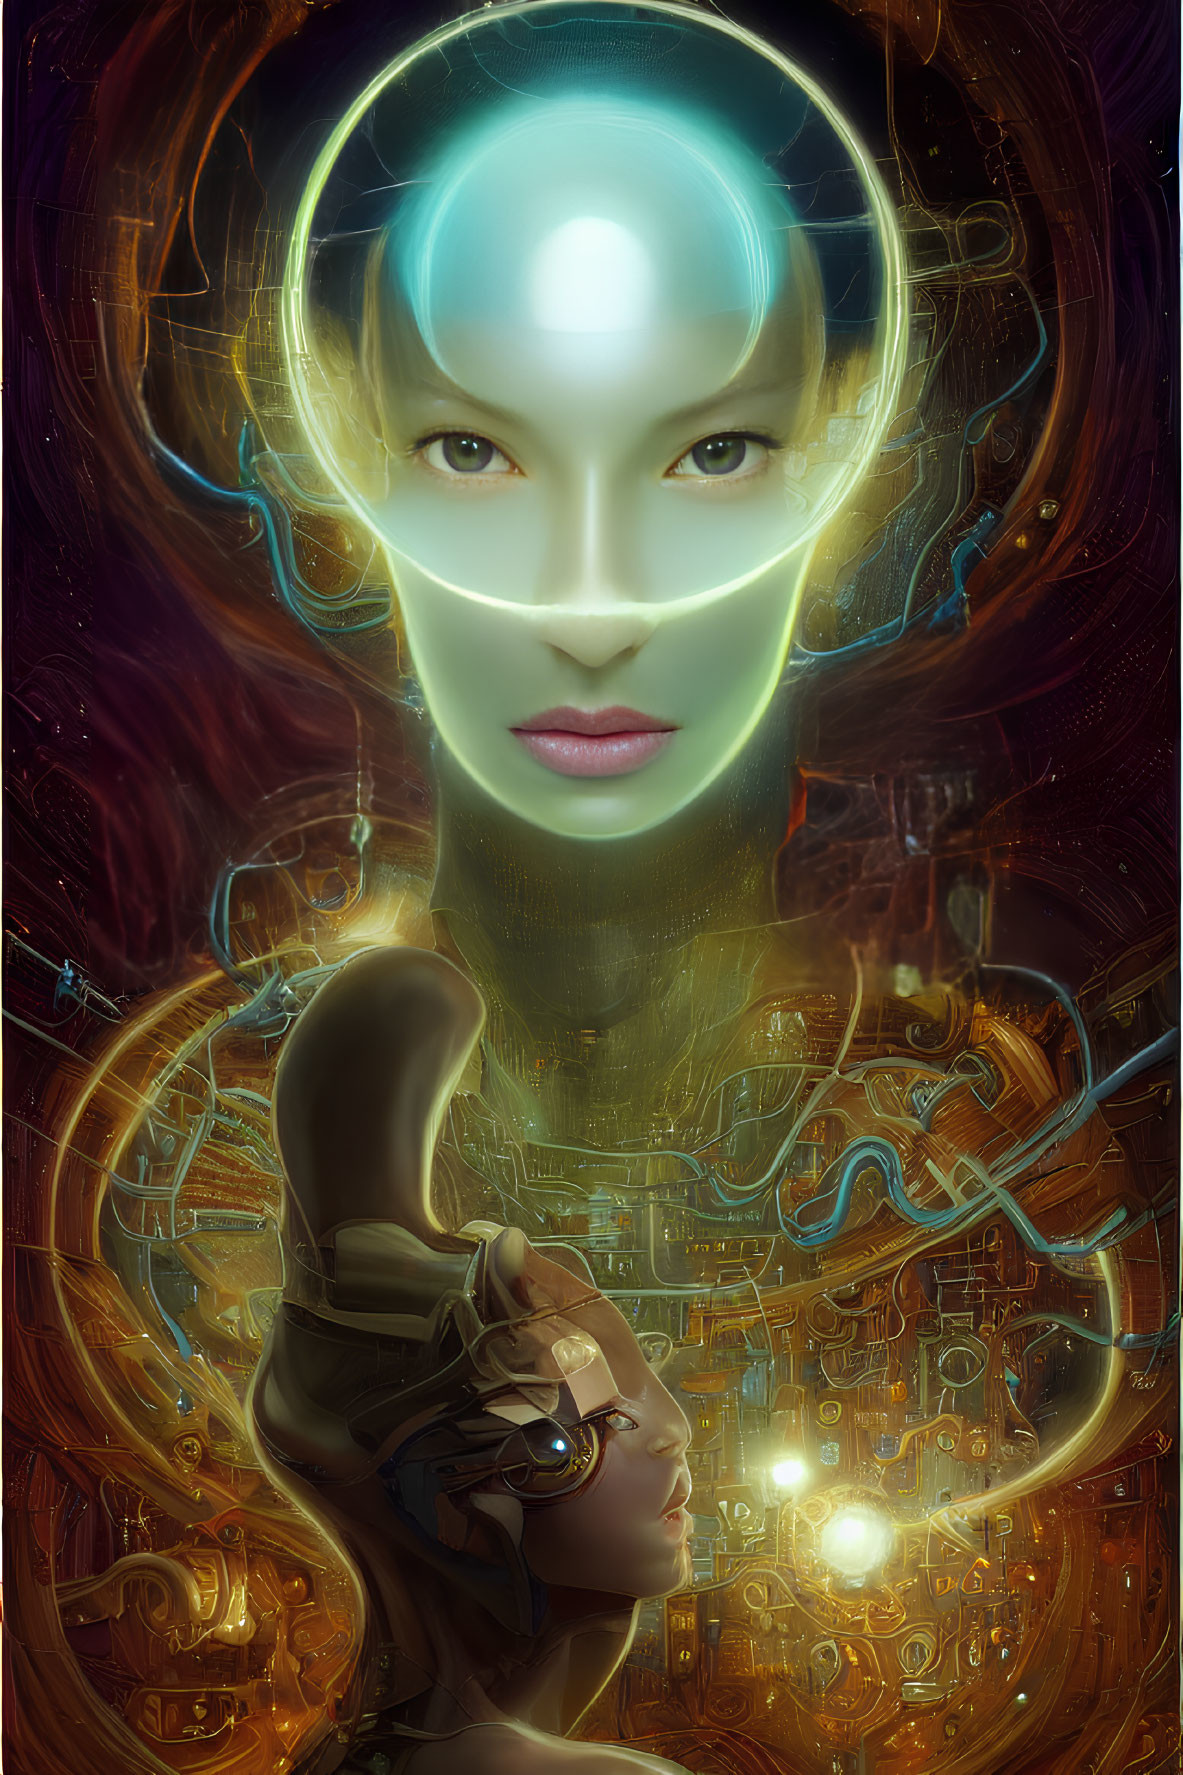 Digital artwork: Female figure with glowing, translucent face amidst futuristic golden circuits.